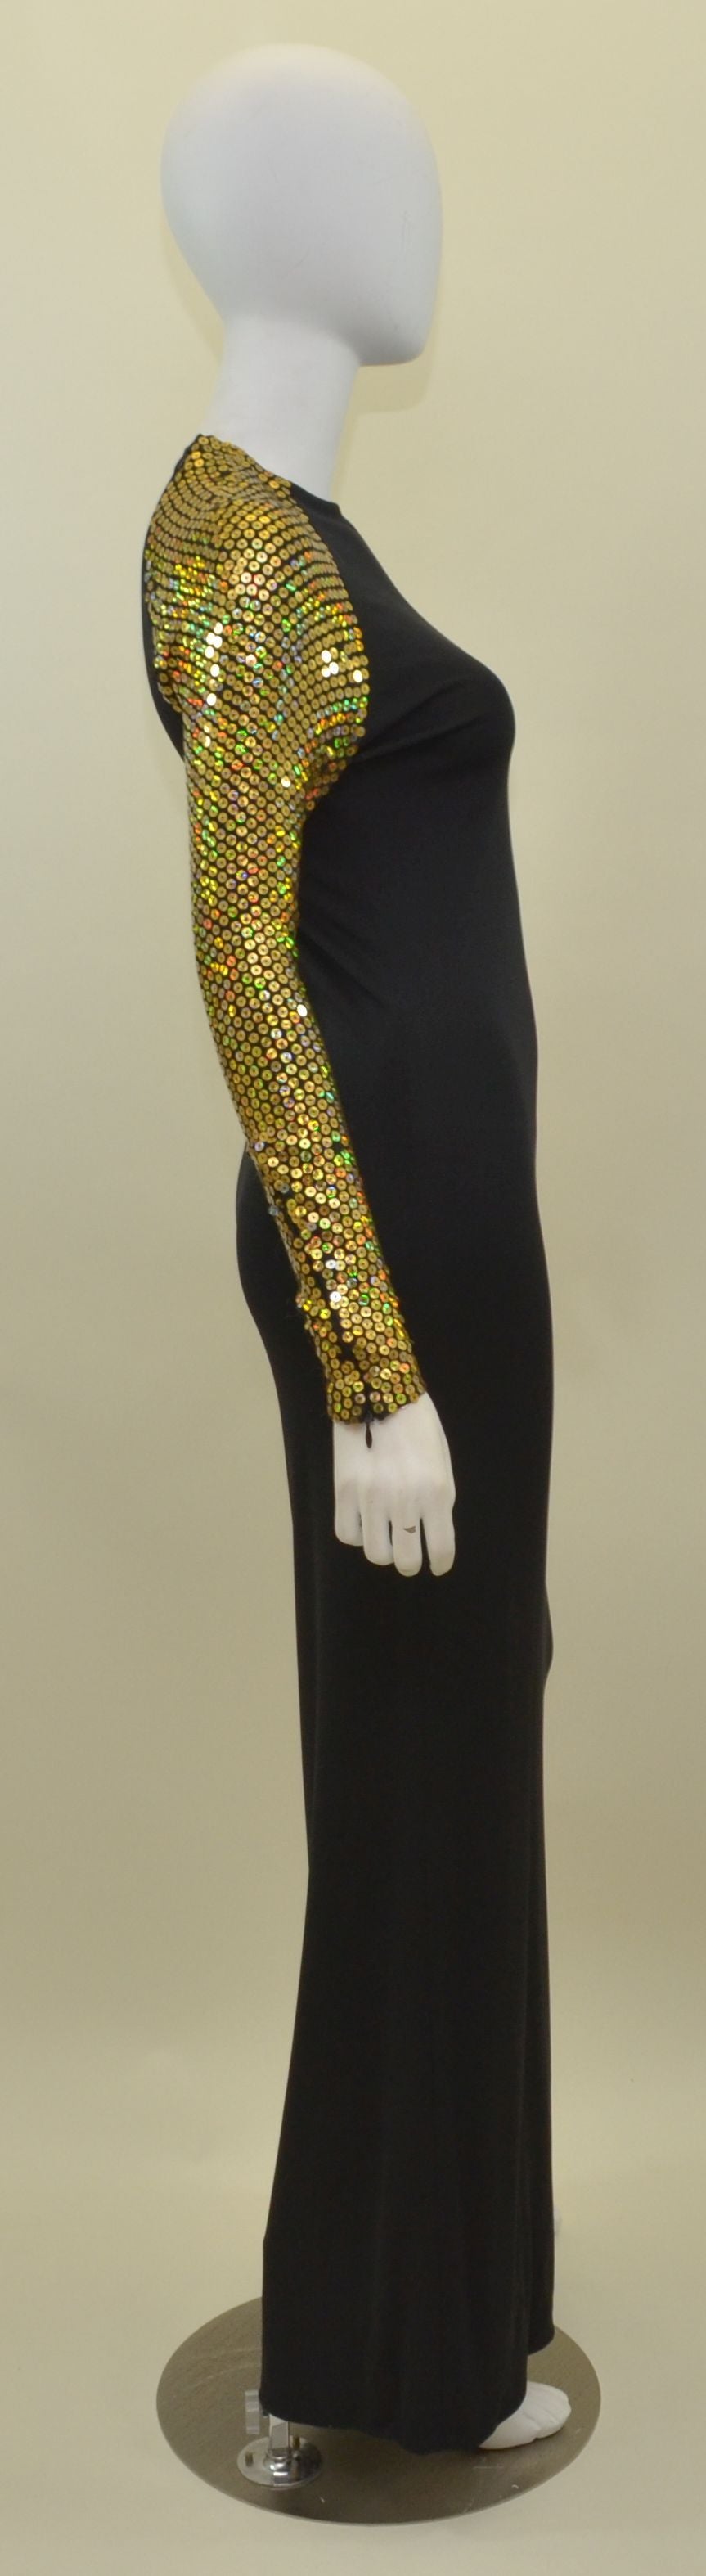 Vintage Halston dress features gold sequin detailing along the sleeves, zipper openings at the shoulders as well as the cuffs. Dress is in great condition with few missing sequins. No major flaws to be mentioned.

Measurements: 
Bust -